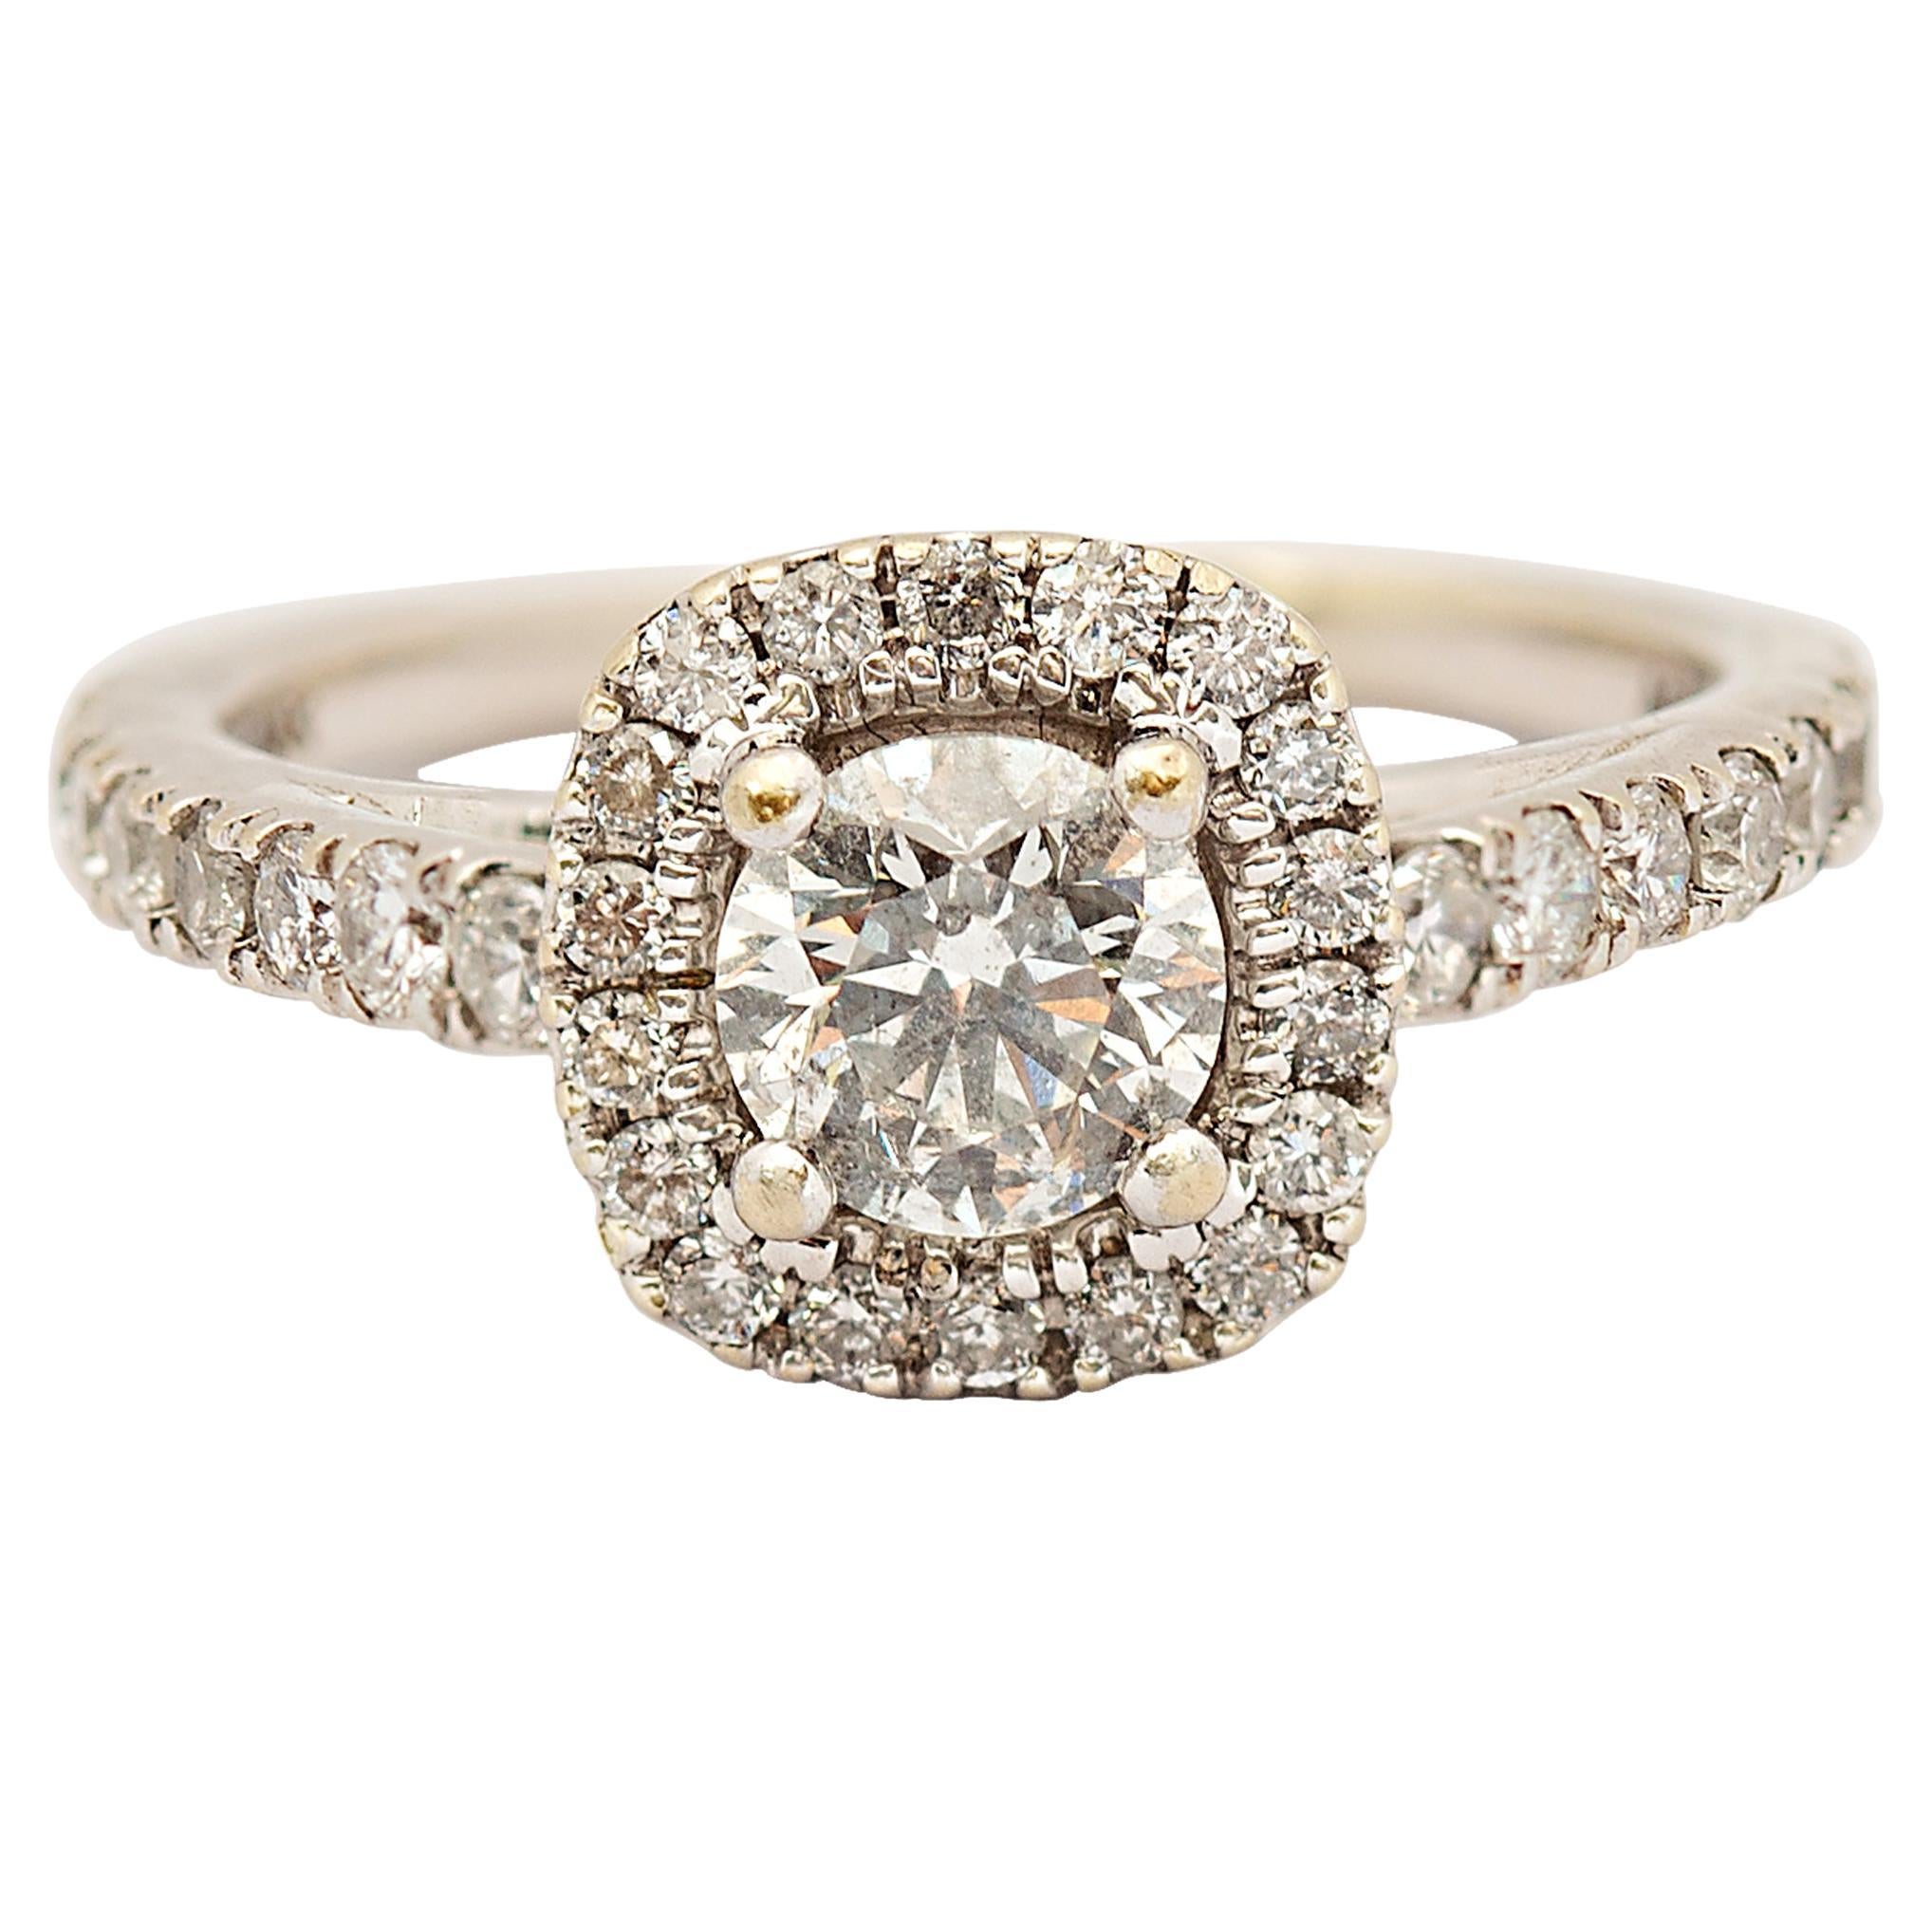 Beautiful set of diamond engagement ring and wedding band. The diamond engagement ring features a round brilliant cut diamond weighing approximately 0.65 carat.  Surrounding this diamond is a cushion-shaped halo of near colorless round brilliant cut